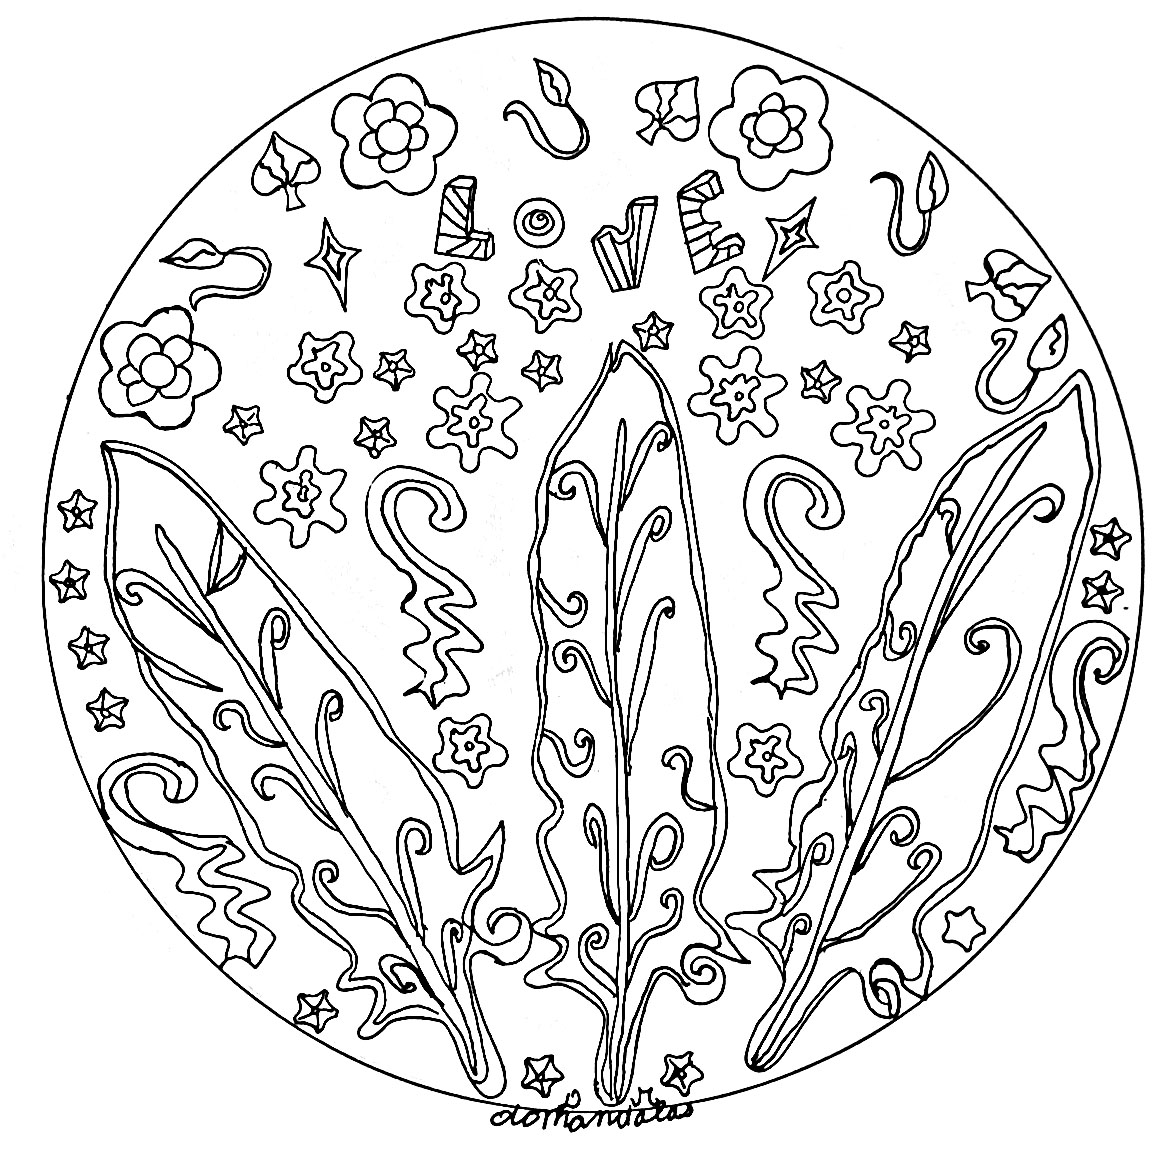 Details relatively simple to color, for a Mandala coloring page very unique and of high quality. You must clear your mind and allow yourself to forget all your worries and responsibilities.